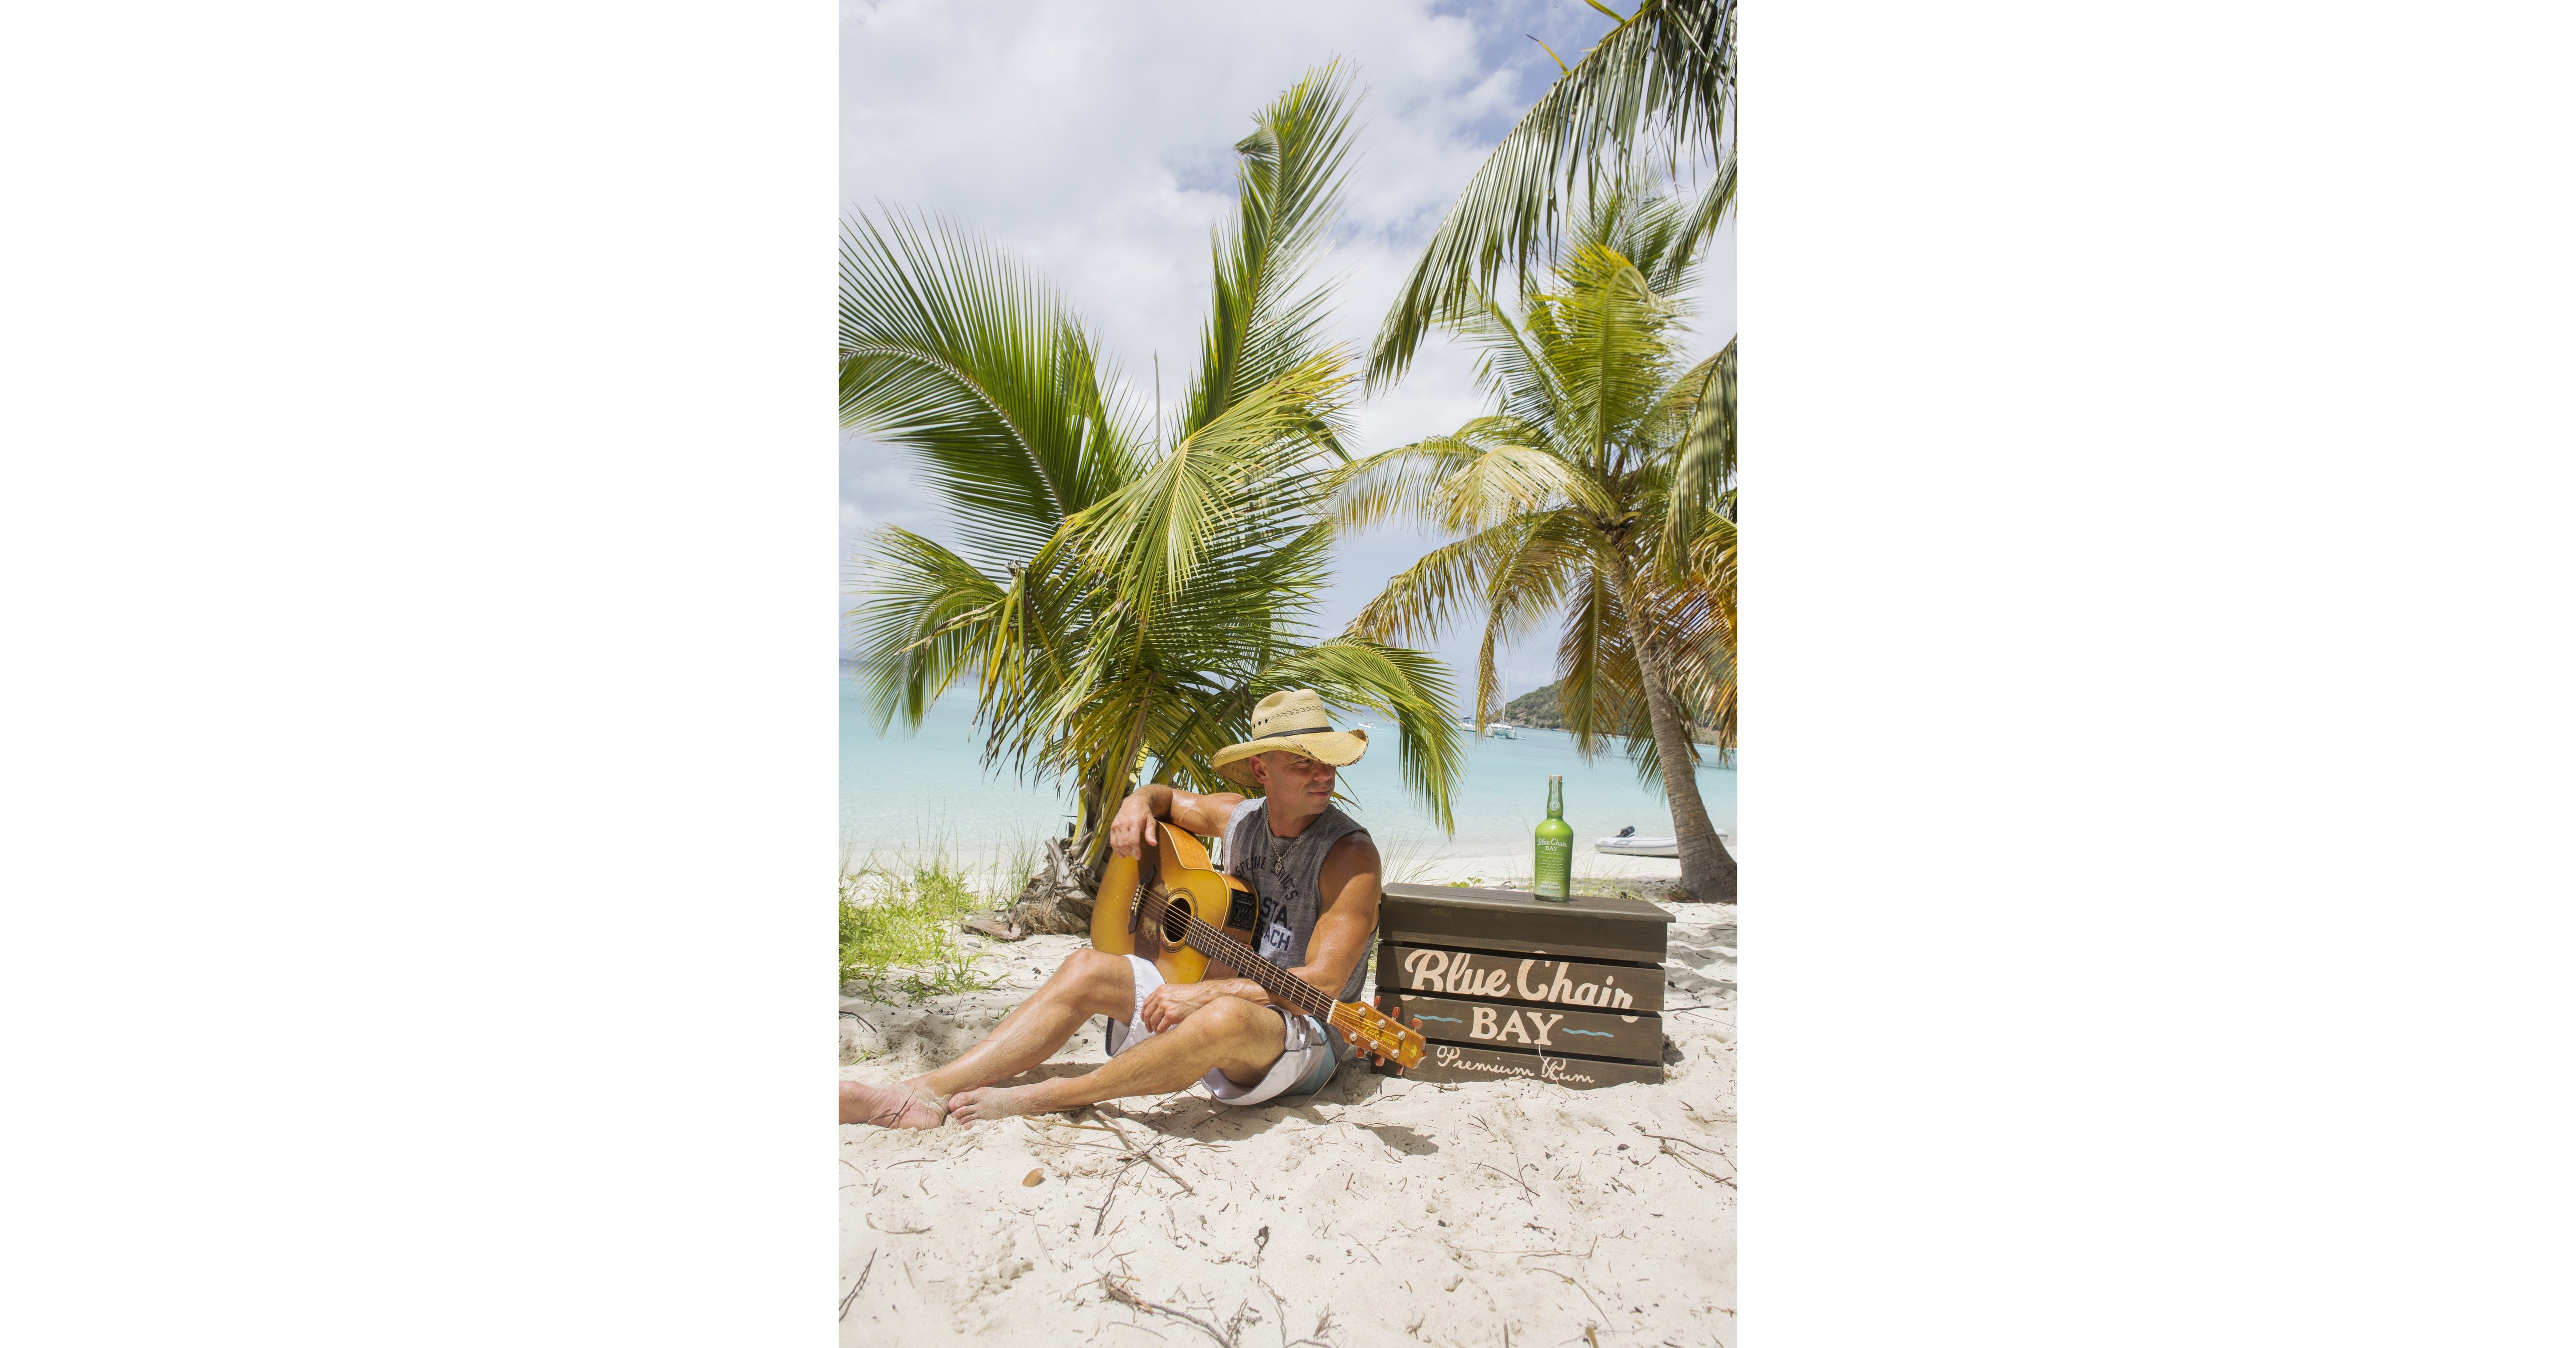 Kenny Chesney's Blue Chair Bay Premium Rum Launches Contest Allowing